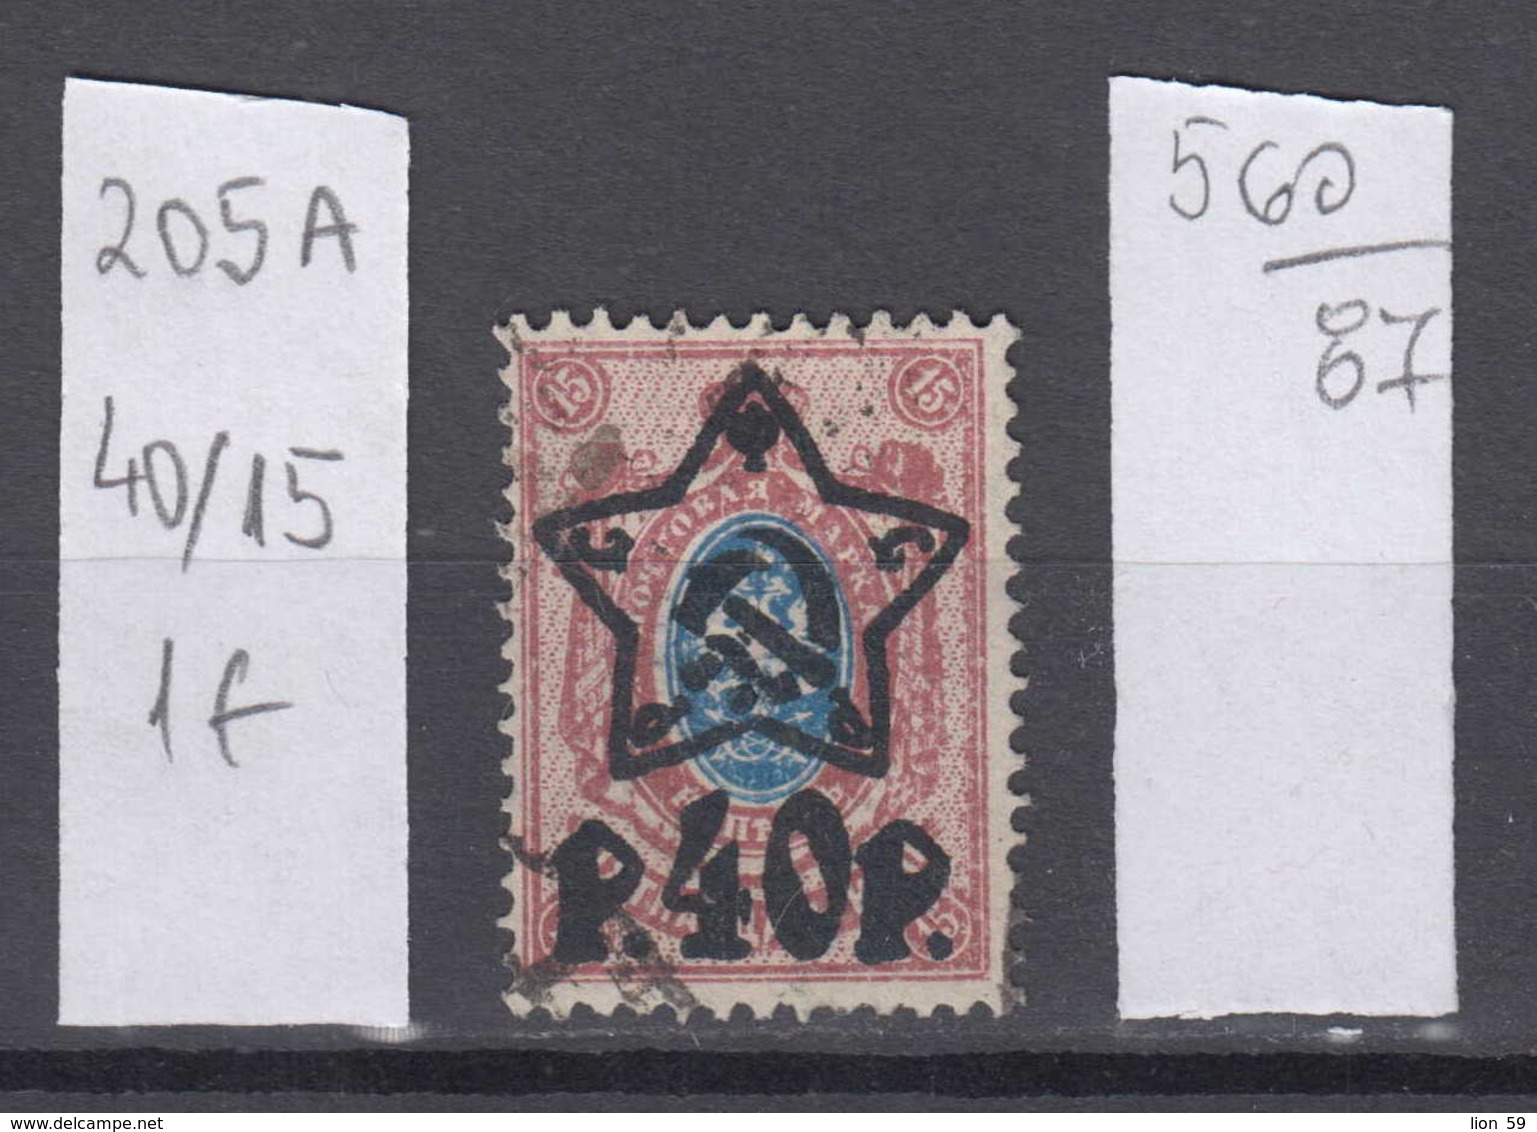 87K560 / 1922 - Michel Nr. 204 A - Overprint 40 R. / 15 K. - Freimarken , Used ( O ) Russia Russie - Used Stamps